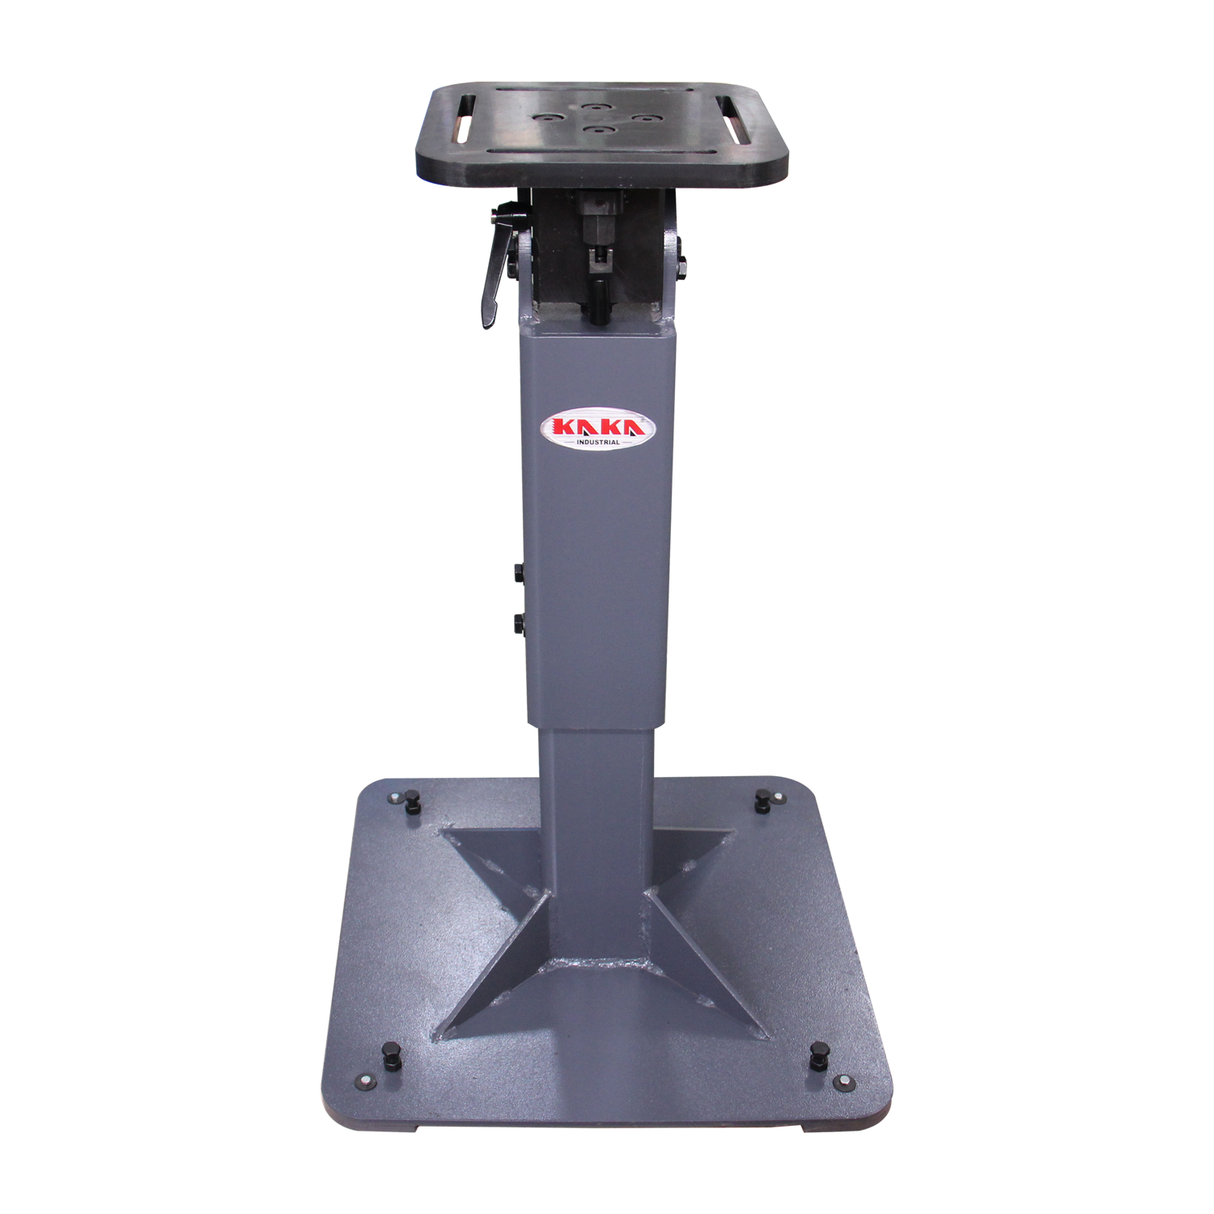 KANG Industrial WP300SM Rotary Table Manual Welding Positioner, Adjustable Table Height